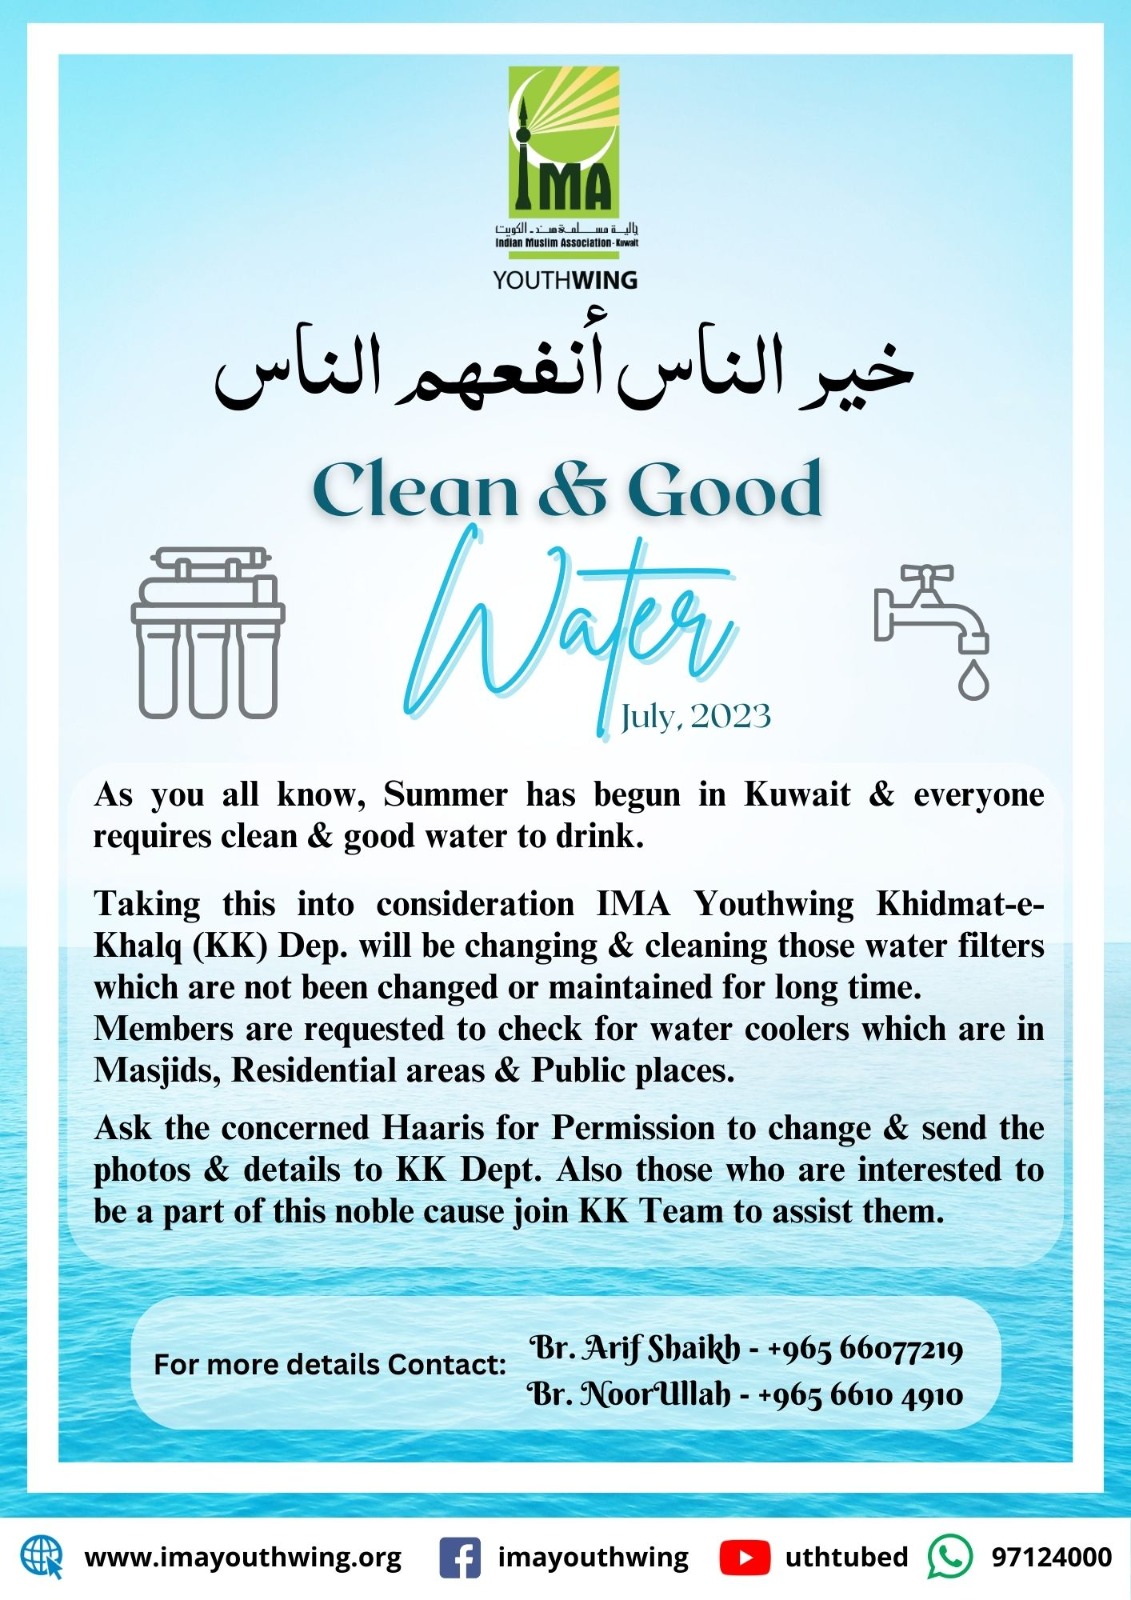 Water filter change campaign flyer